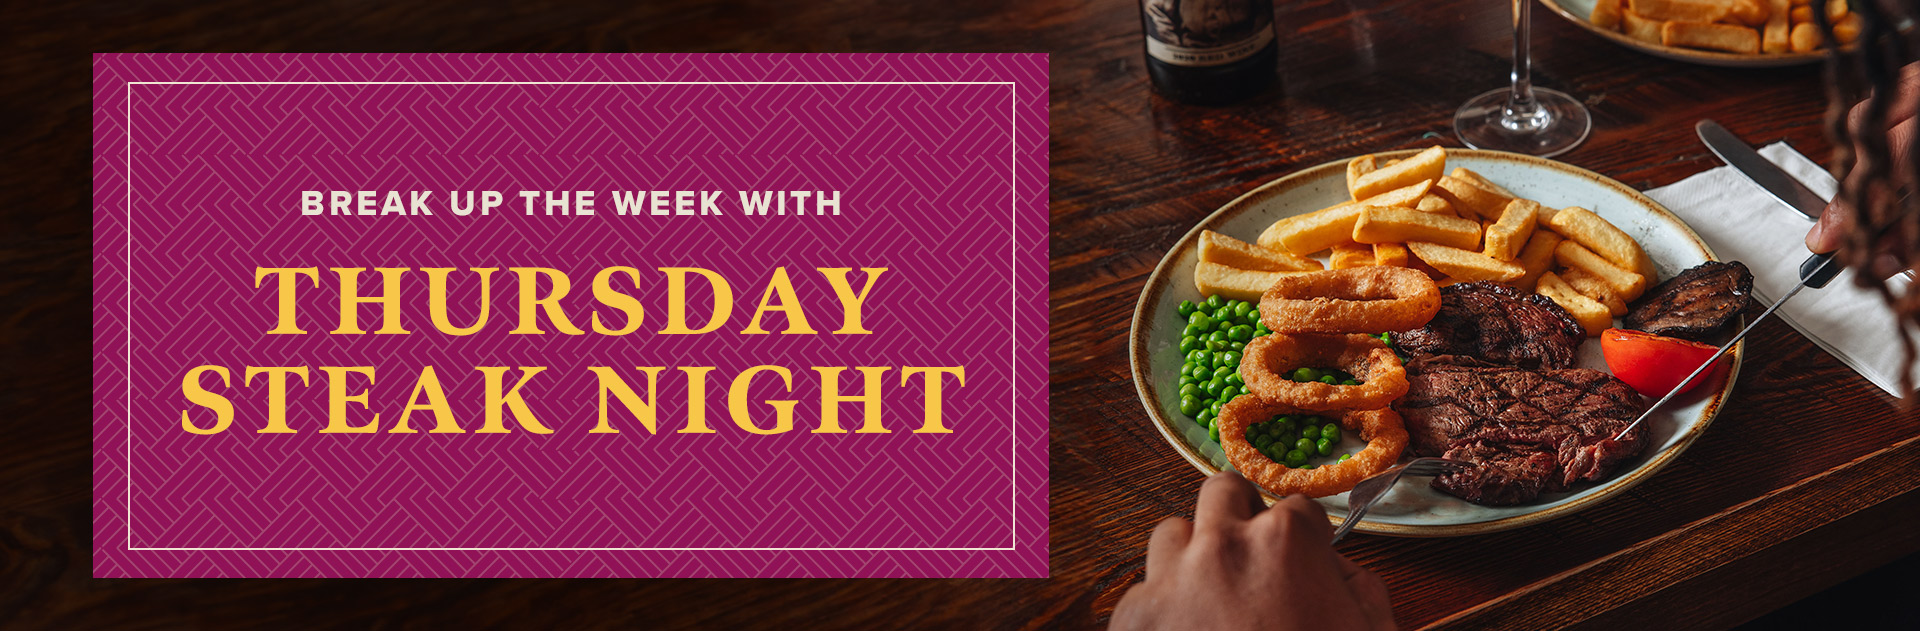 Thursday Steak Night at The Huntsman and Hounds